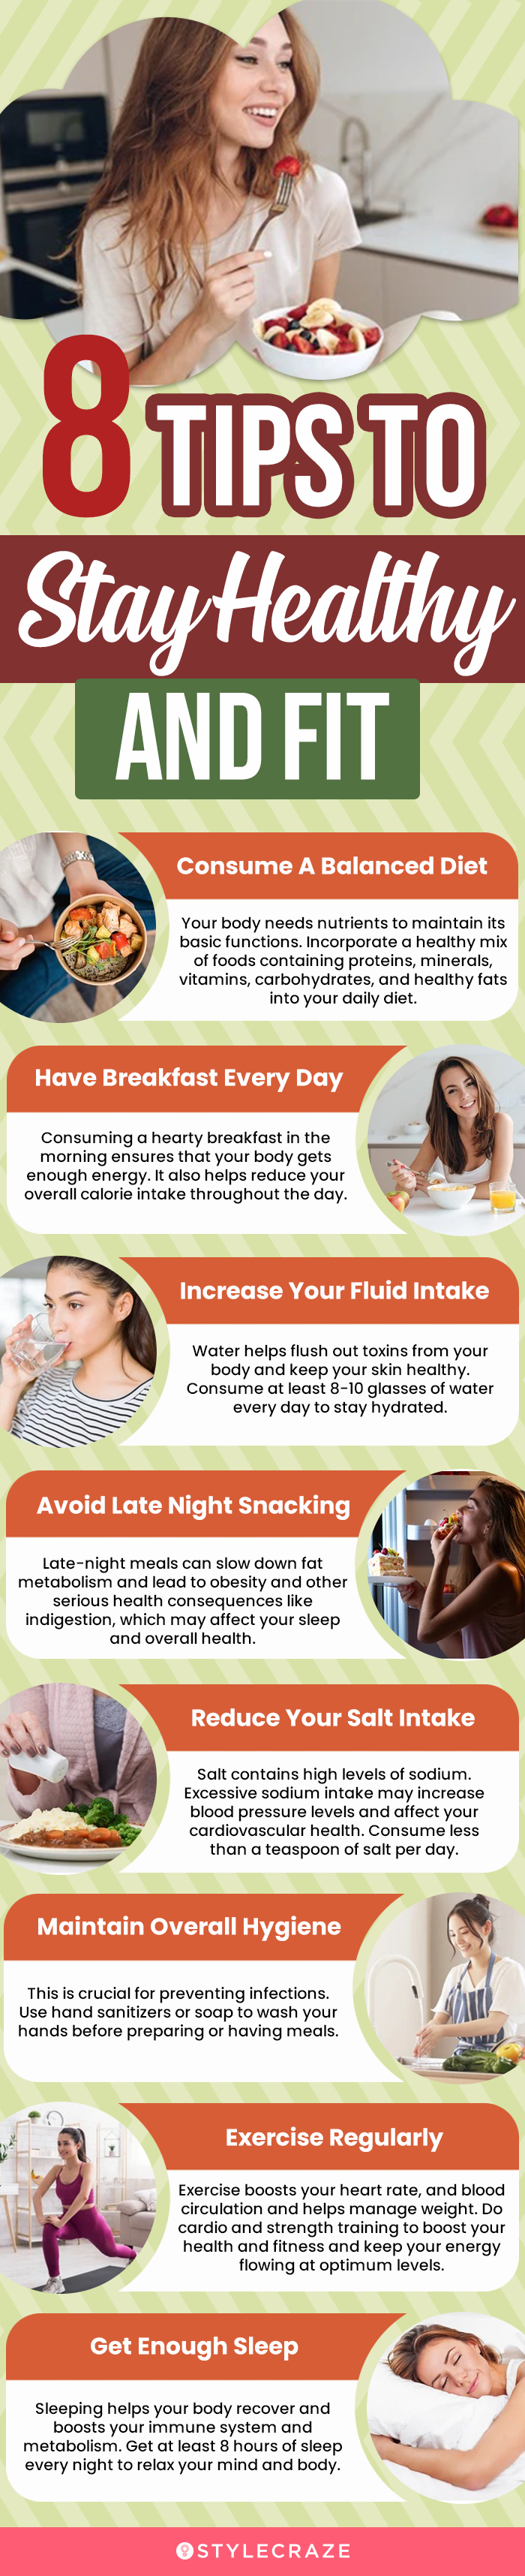 8 tips to stay healthy and fit (infographic)